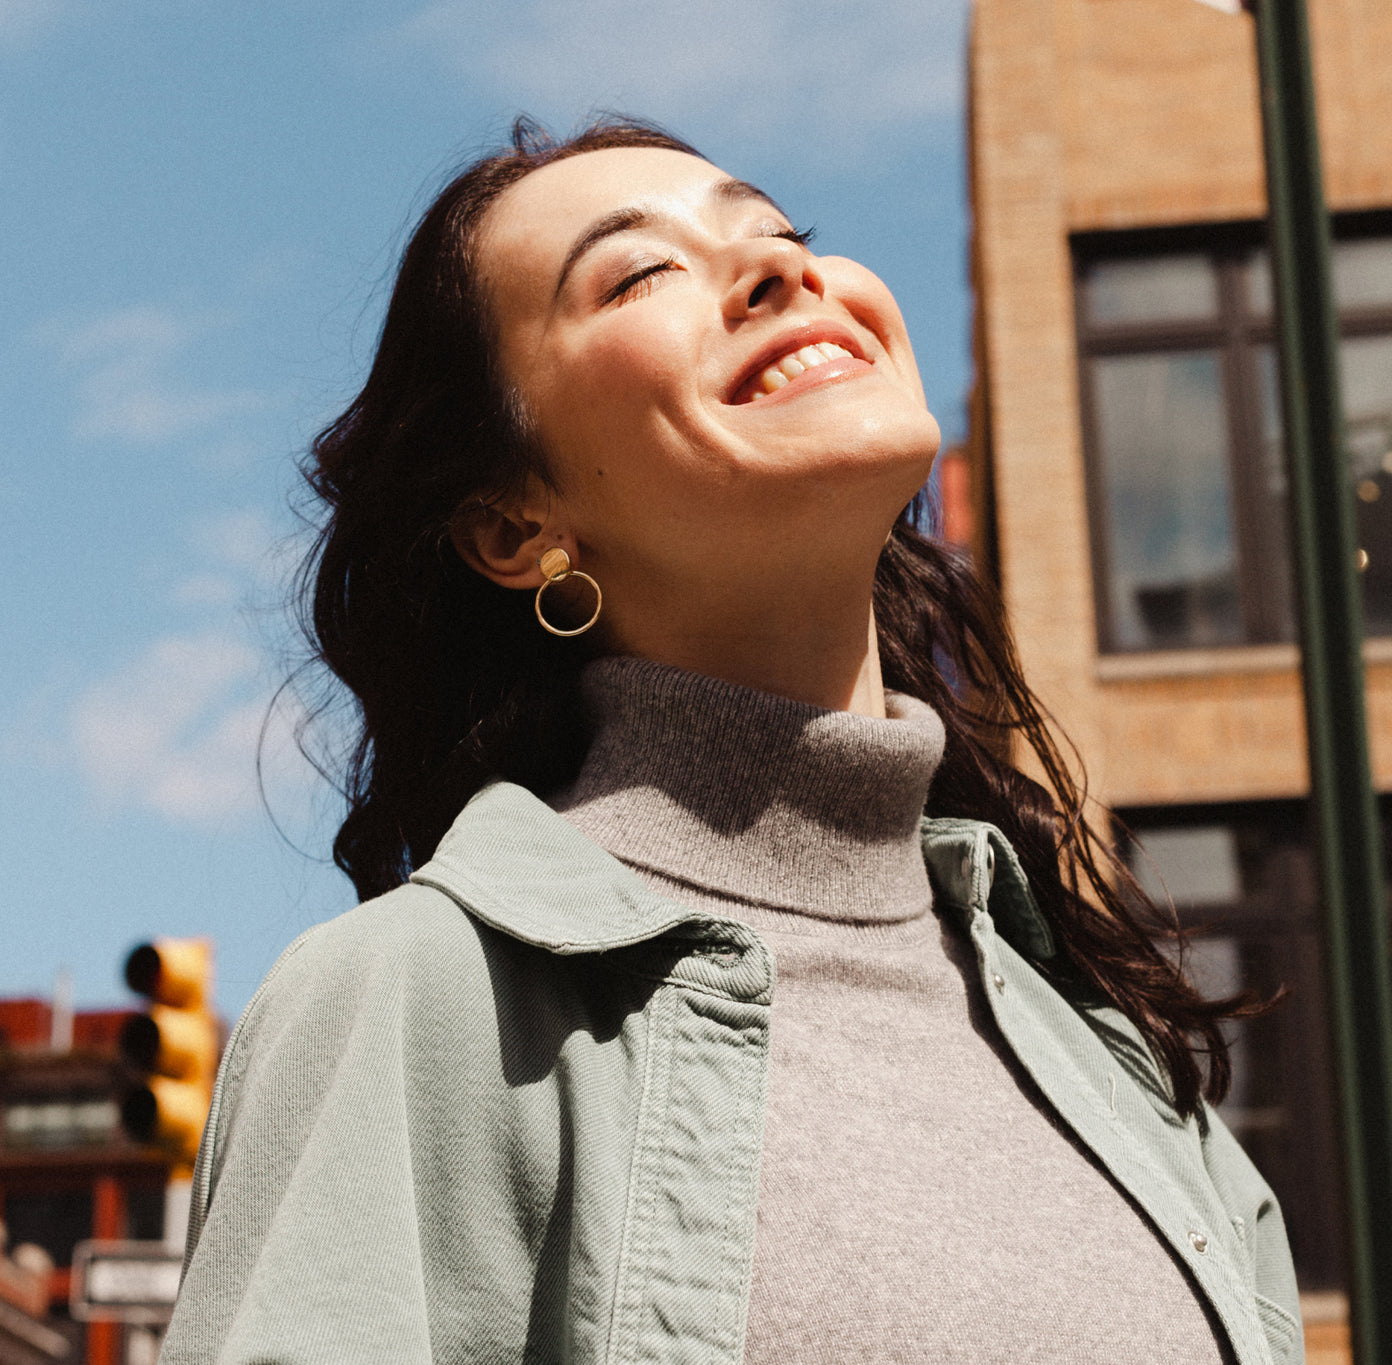 woman walking in city and looking up at sunny sky